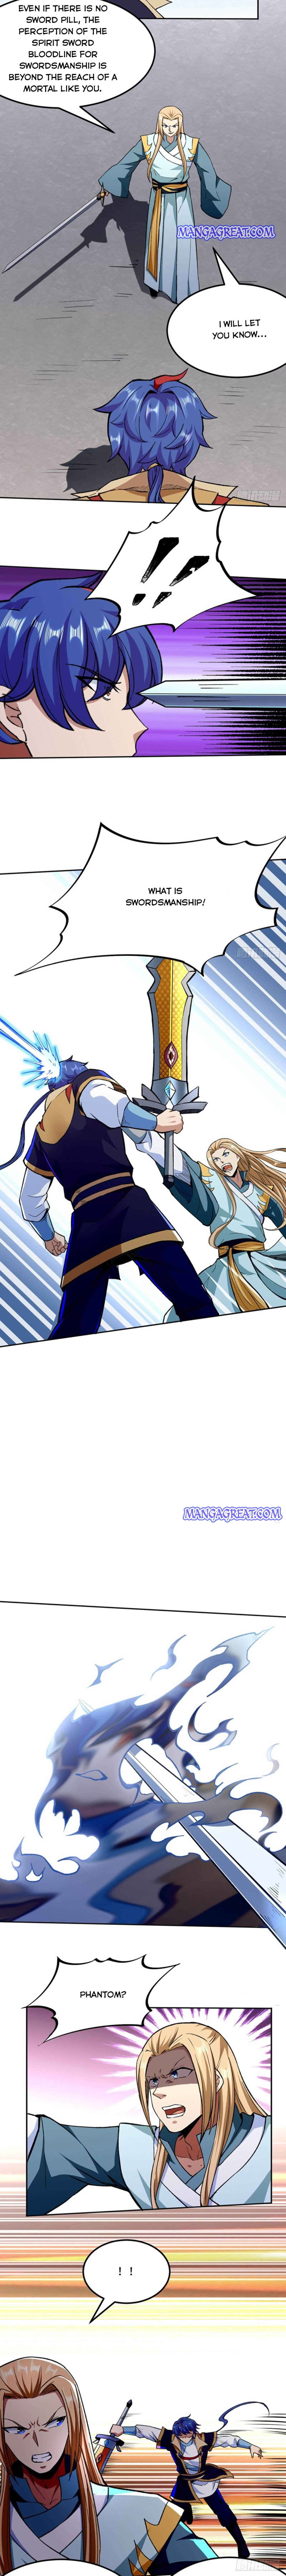 Martial Arts Reigns Chapter 269 page 2